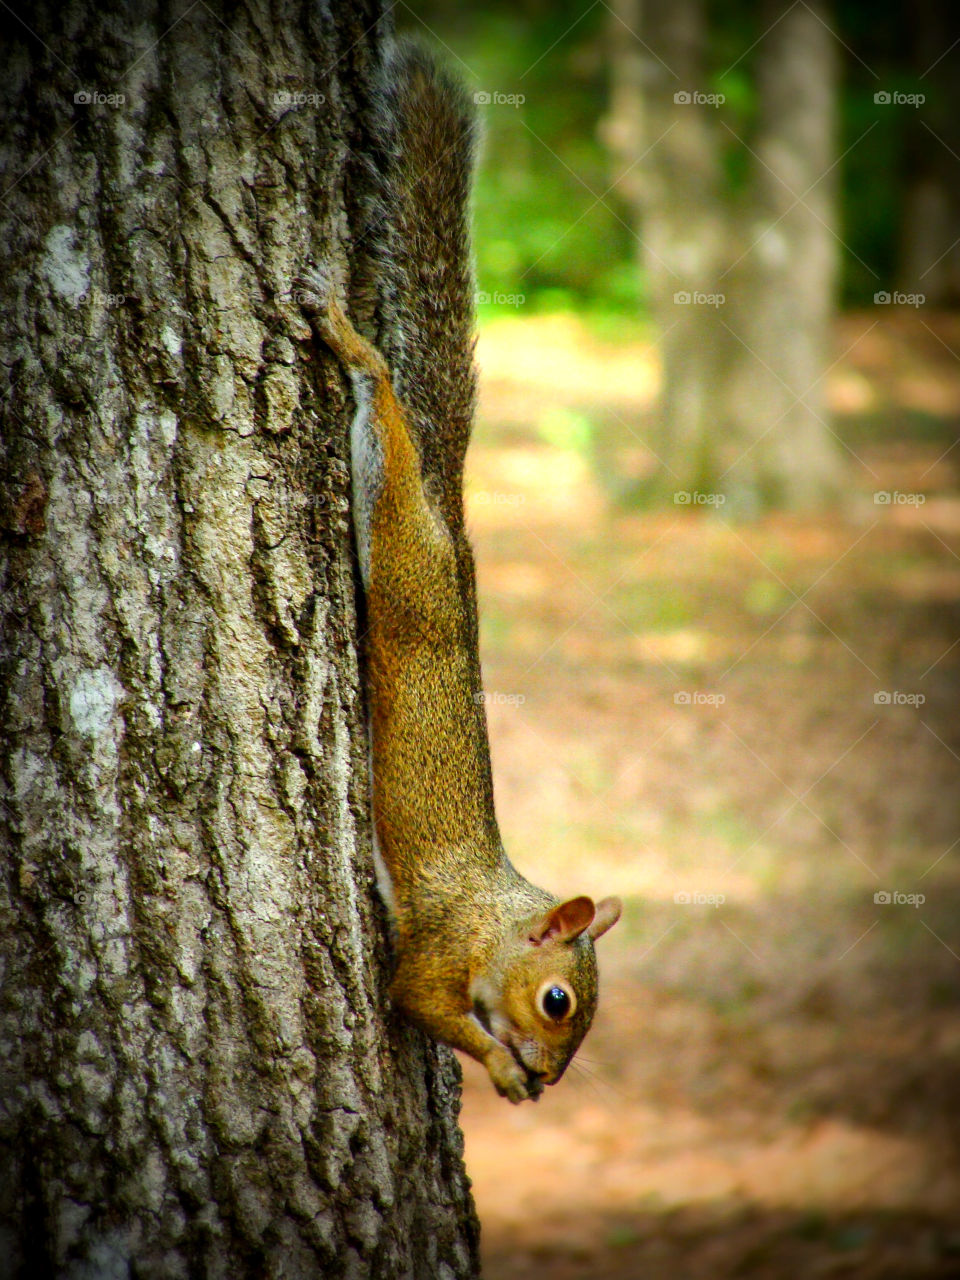 A squirrel pauses for a nibble while climbing down a tree trunk.